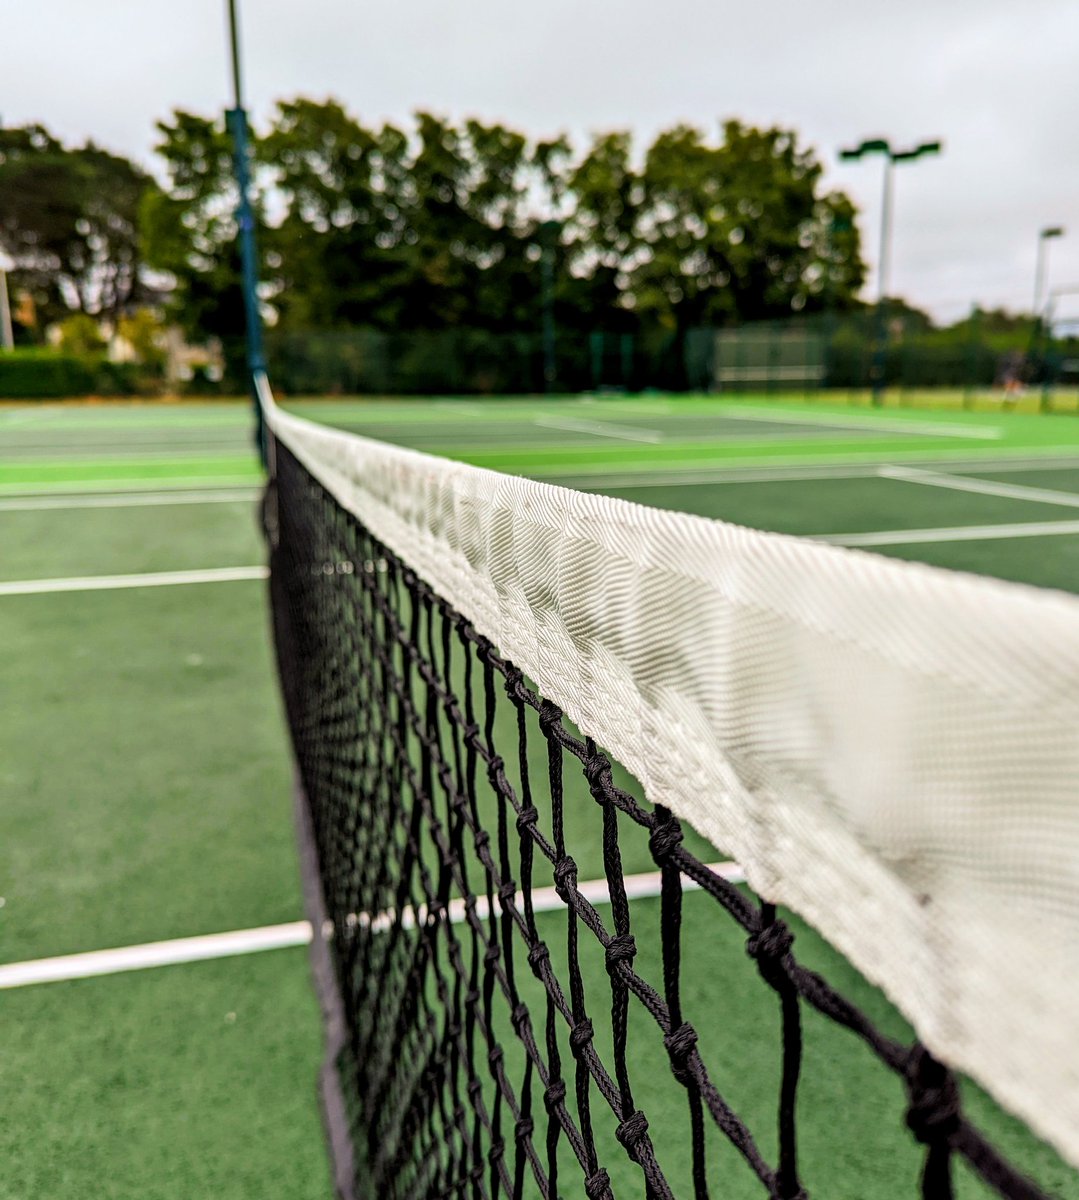 It's coming home. The Welsh National Tennis Championships are in Penarth next week at both Penarth clubs. Admission free. Bar and 9am-9pm (variable) from Sunday. First Nat Champs in #Penarth since 1976. Come and see some great #tennis #WhatsOn